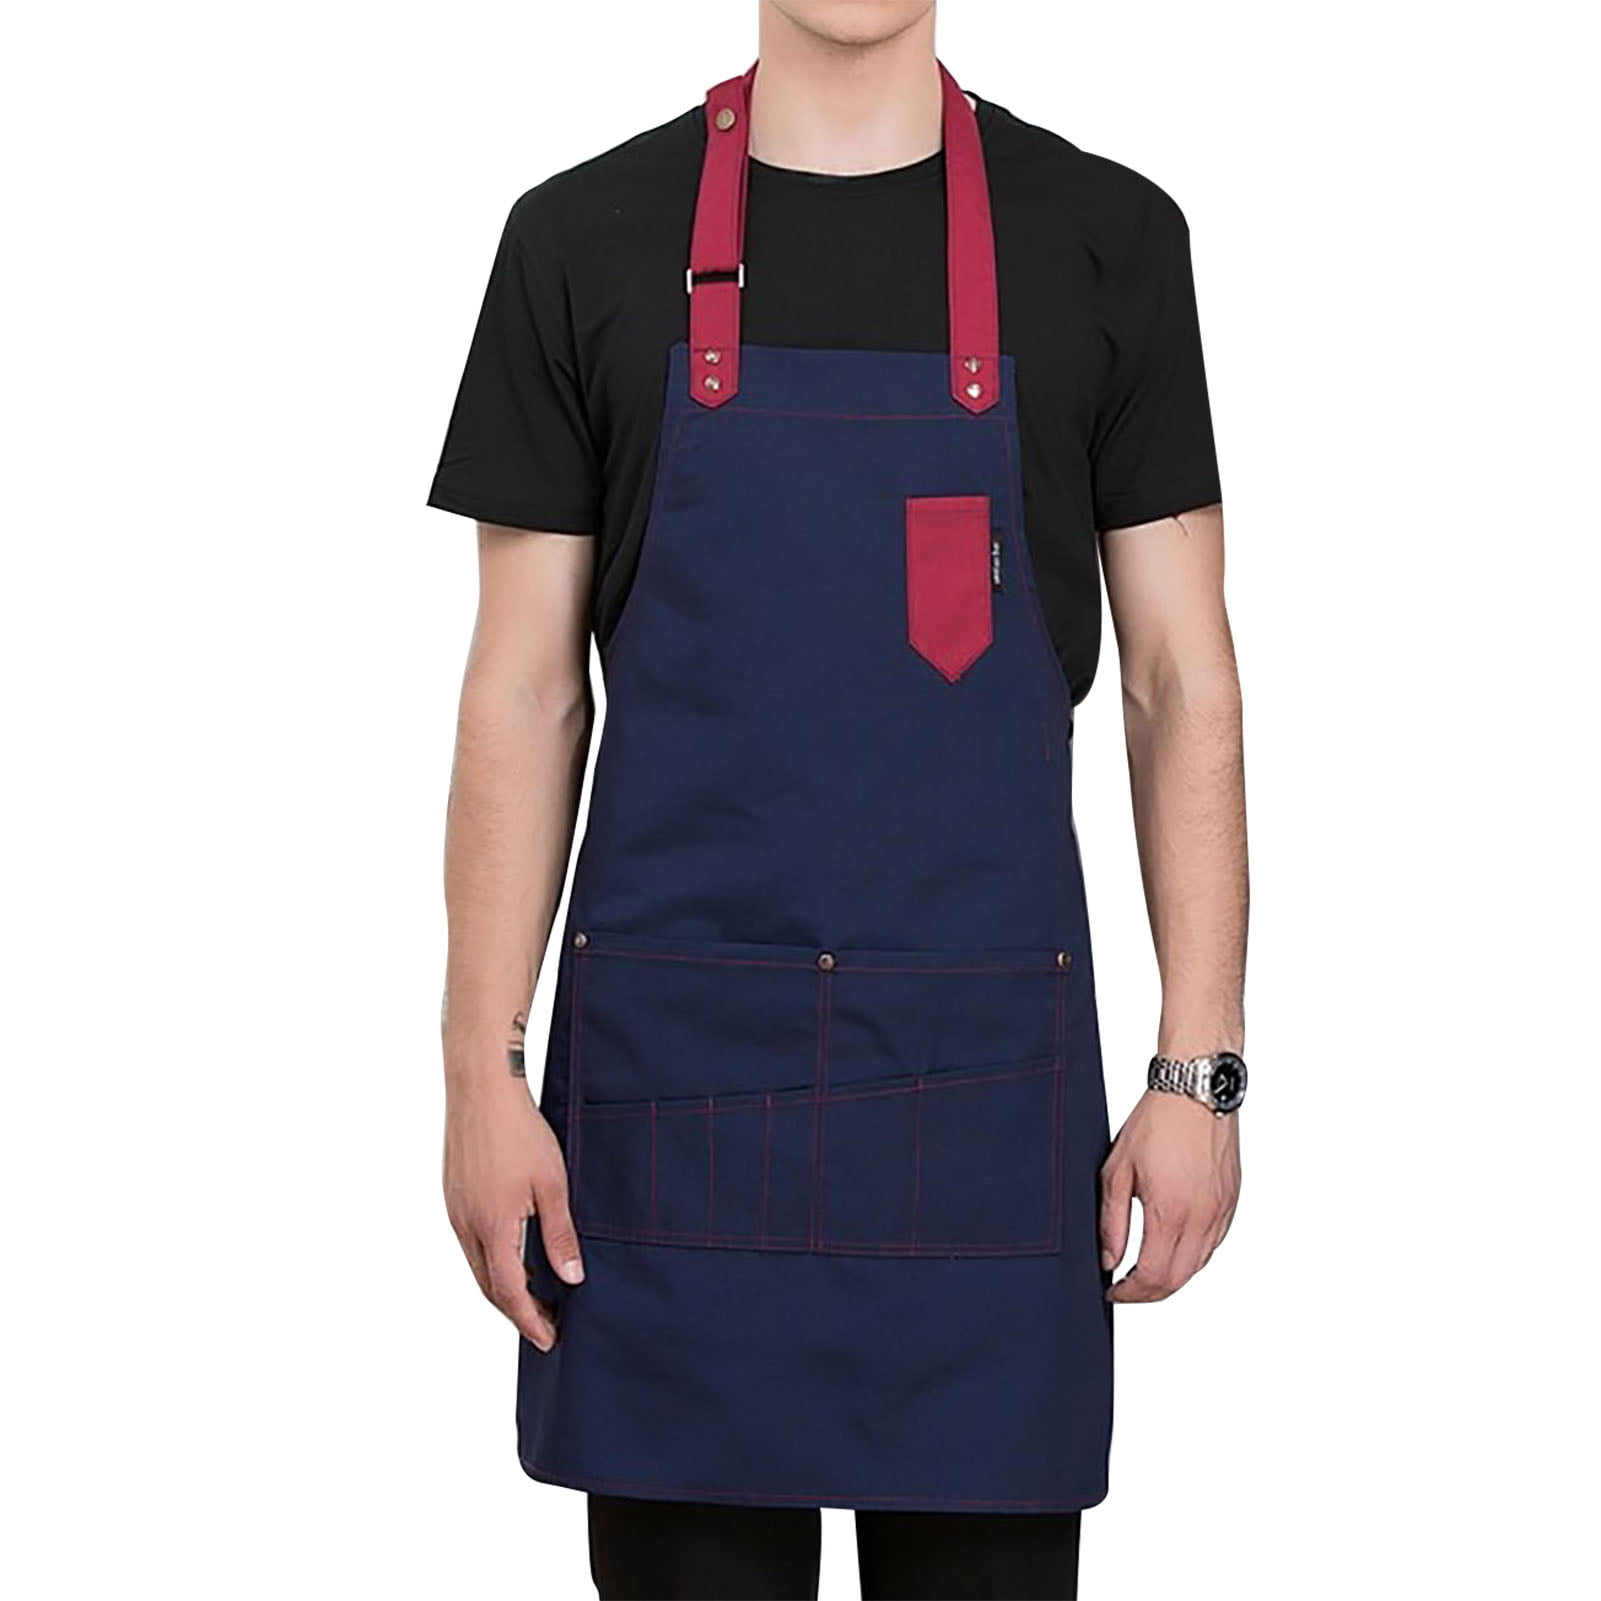 Details about   Professional Full Length 100% Cotton Bib Apron Cooks Bakers Chefs Kitchen Pinny 